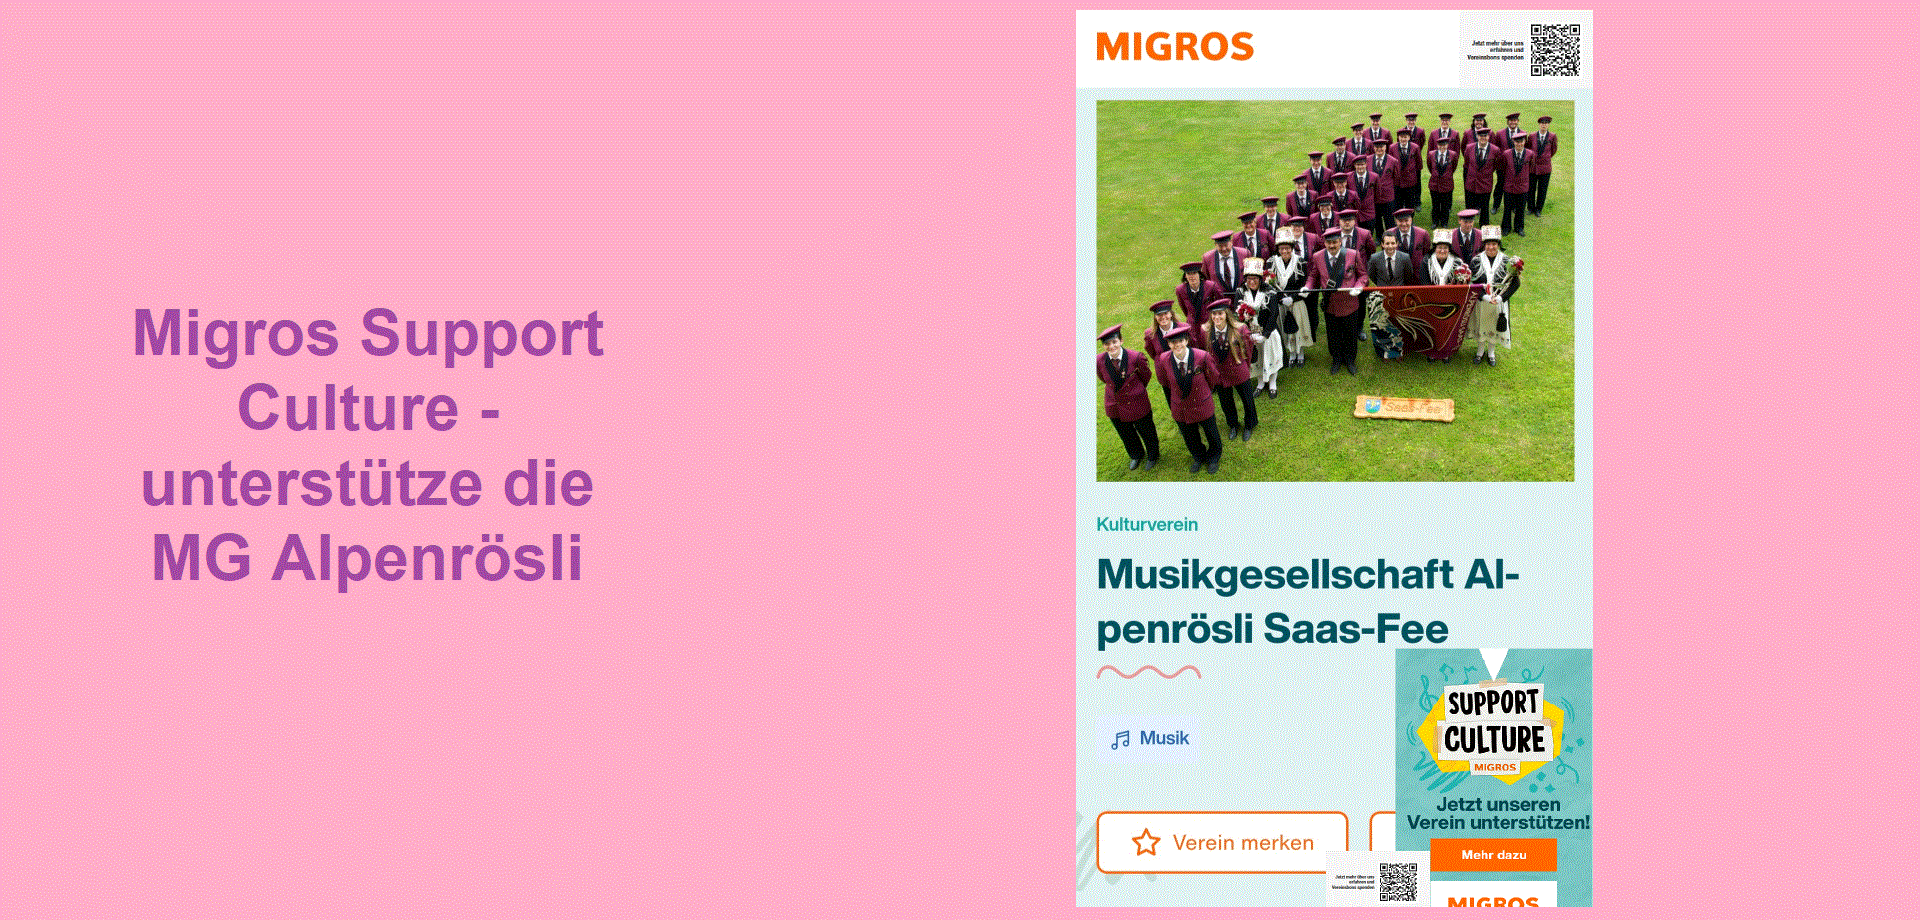 migros support culture1 gif